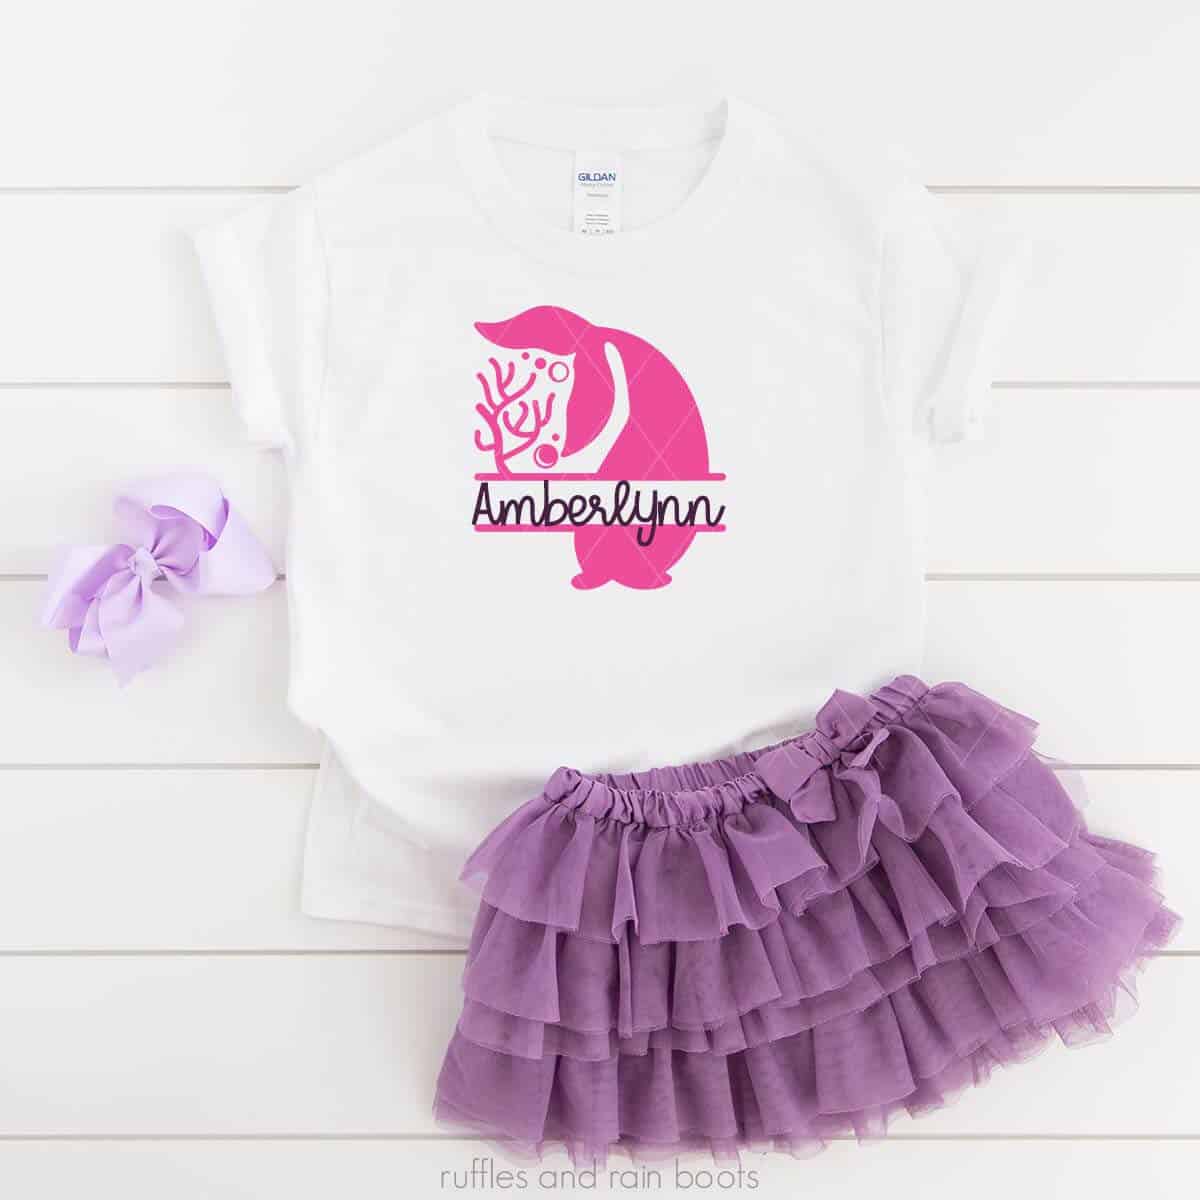 Square image showing a purple hair bow, purple tulle skirt, and white t shirt with coral and mermaid tail monogram cut file in pink vinyl.